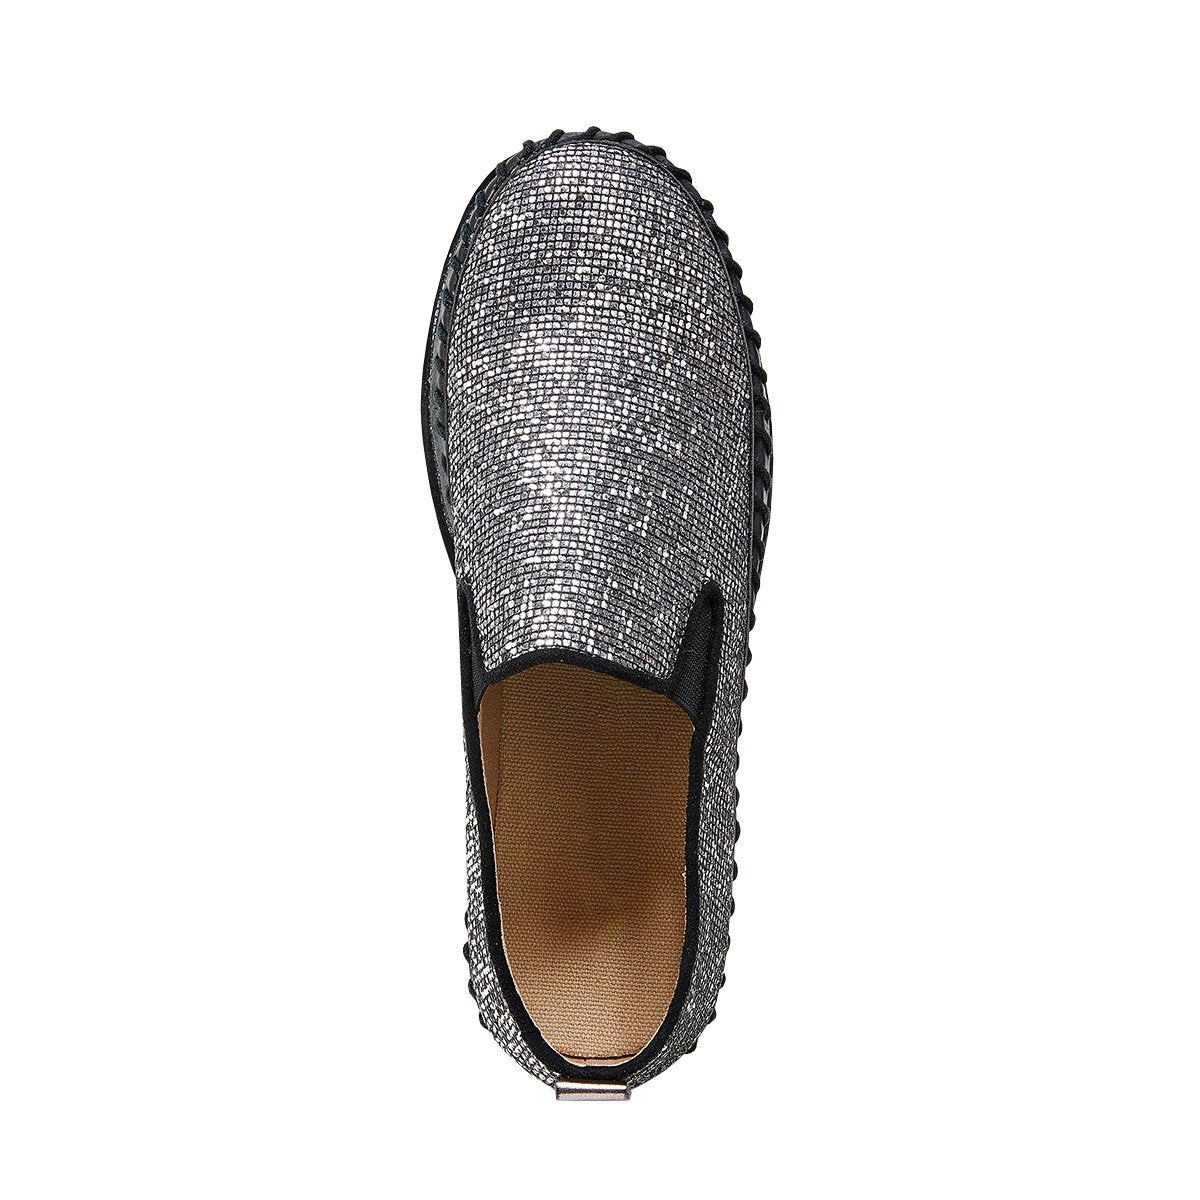 Fashion Sparkly Sneakers for Women